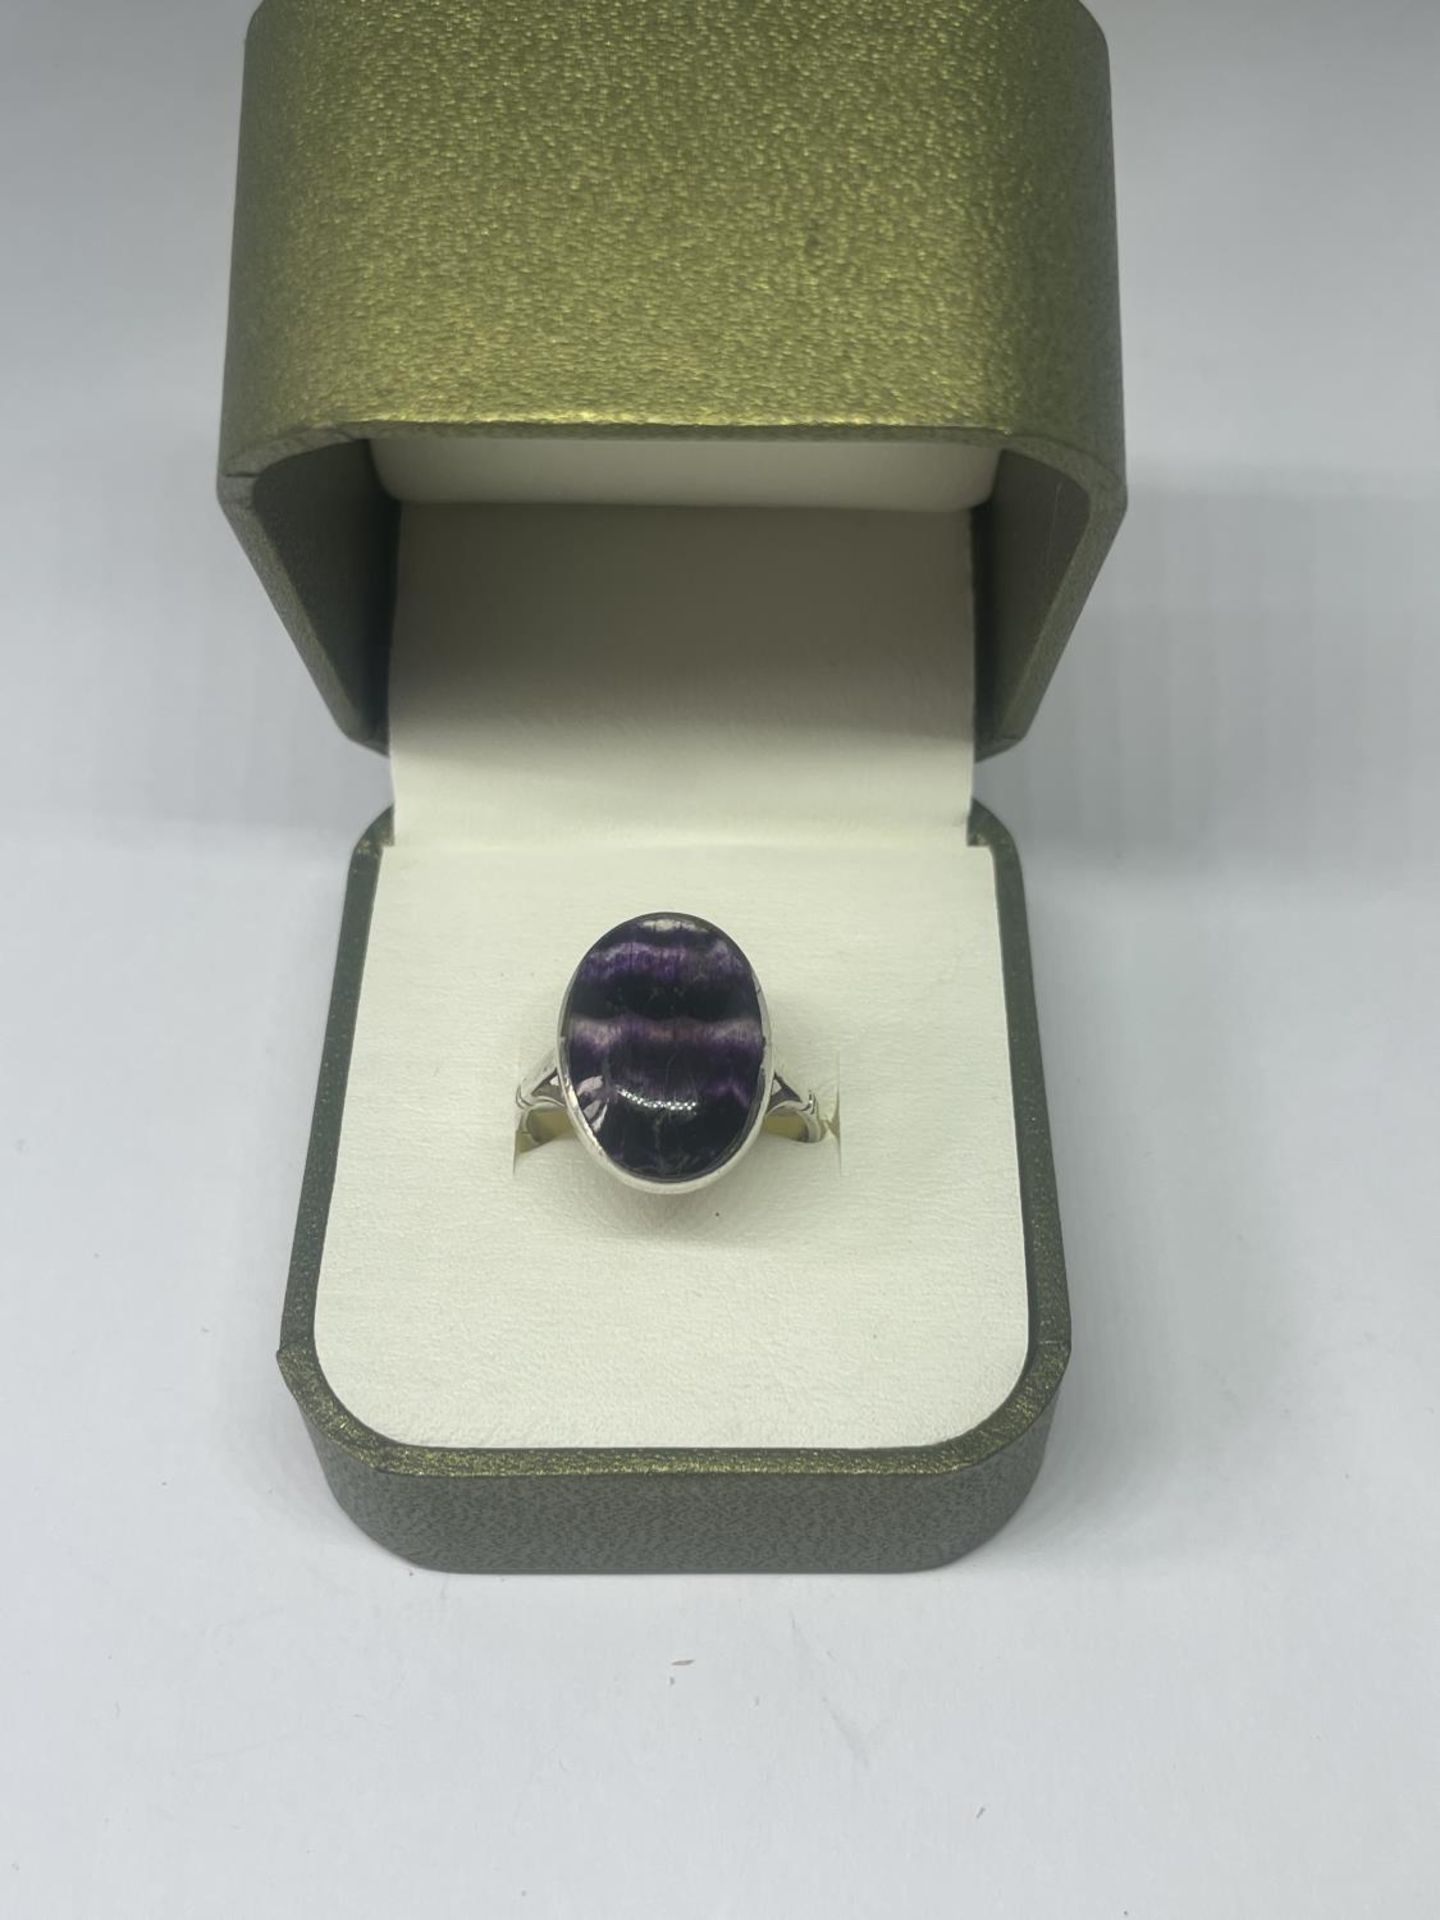 A SILVER RING WITH AN OVAL BLUE JOHN STONE IN A PRESENTATION BOX